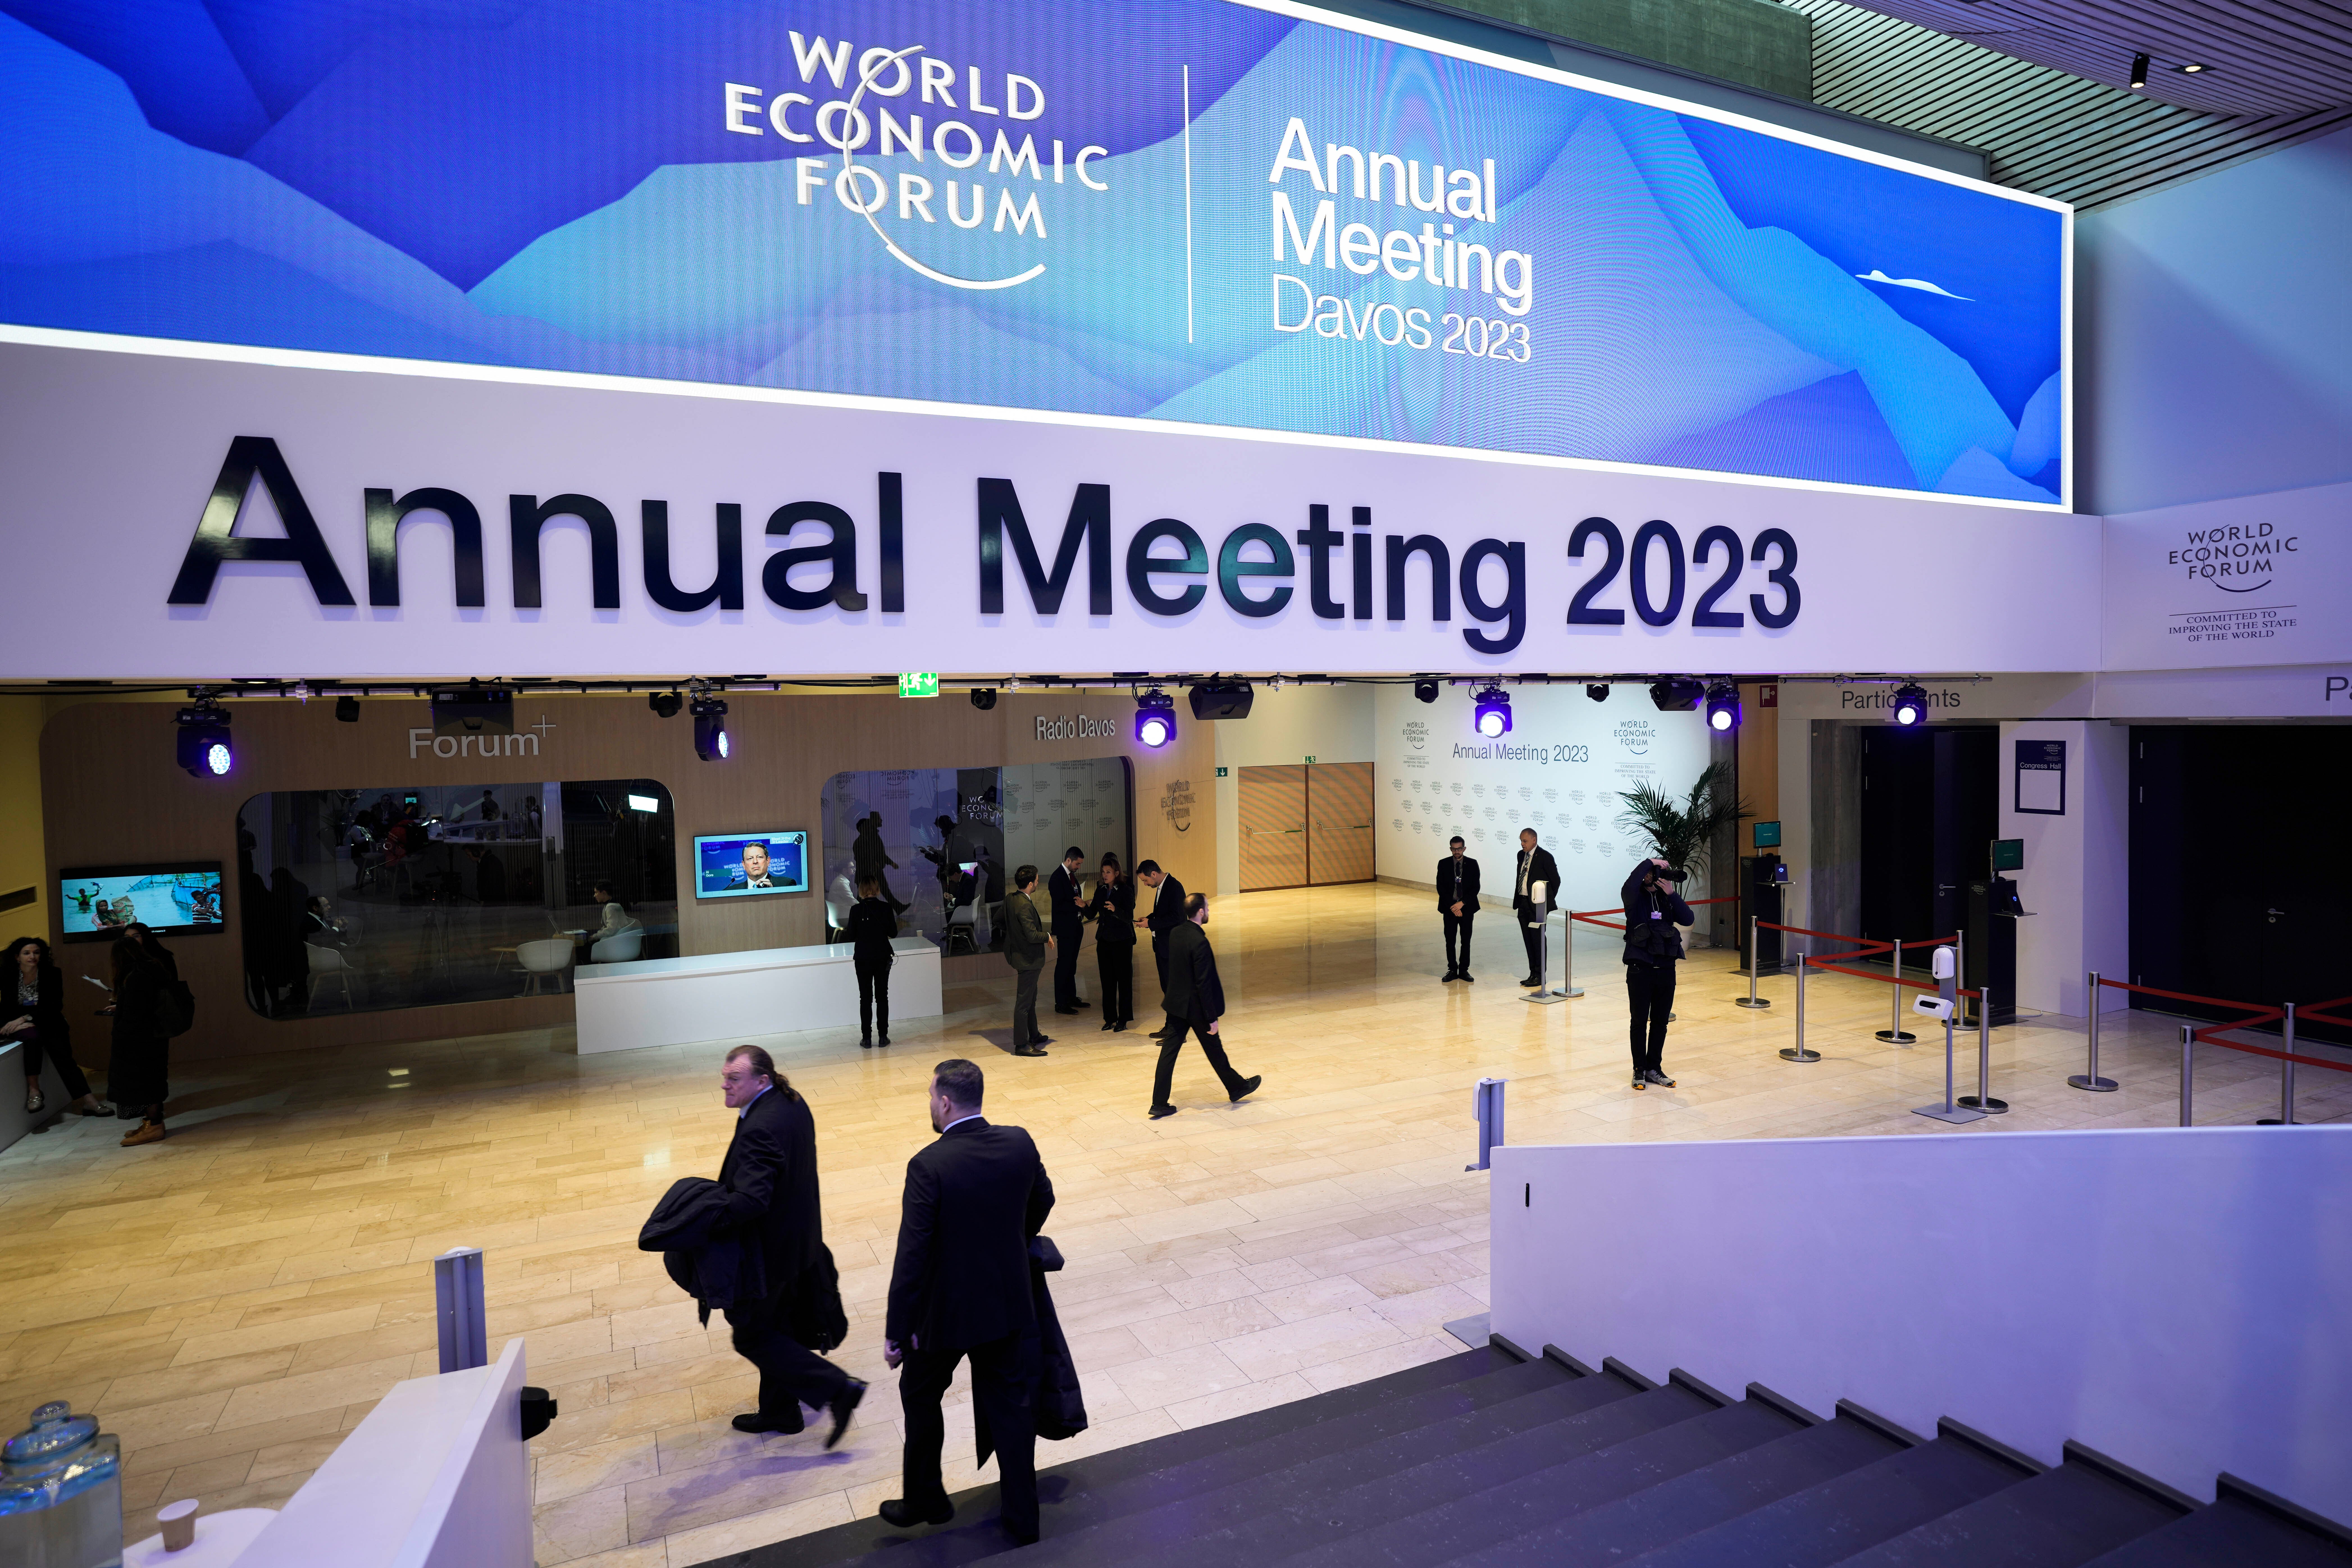 People gather in the Davos Congress Centre prior to the start of the World Economic Forum